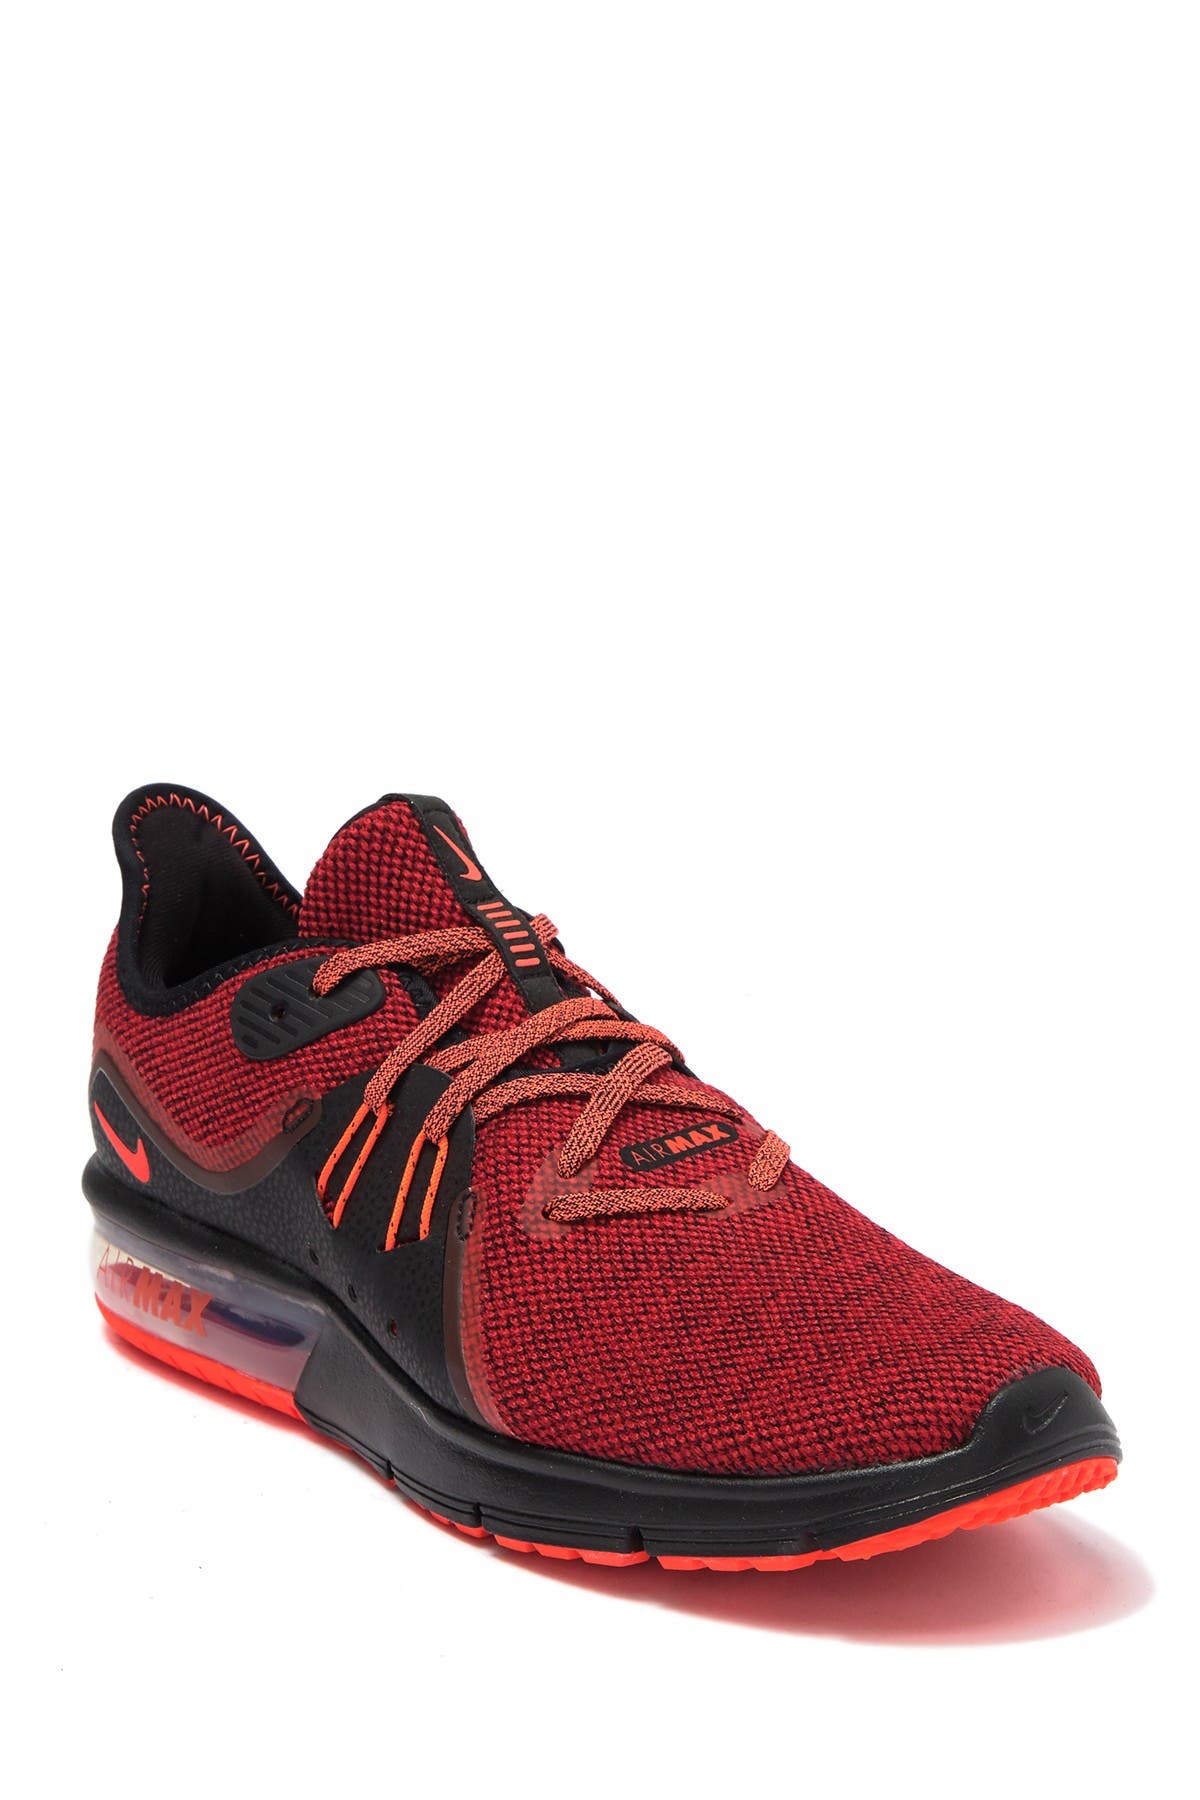 nike max sequent 3